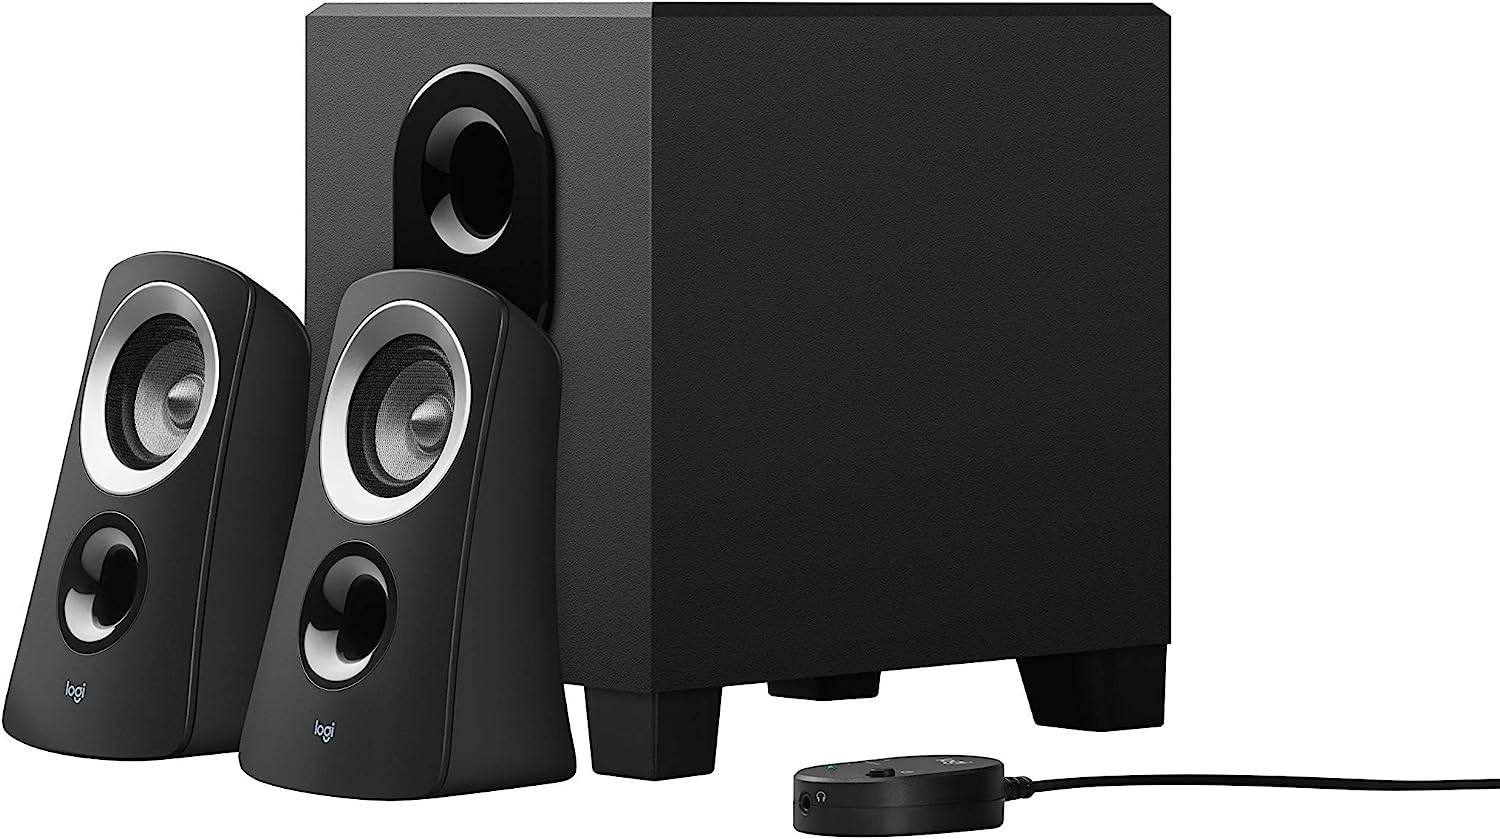 Logitech Z313 2.1 Multimedia Speaker System with Subwoofer, Full Range Audio, 50 Watts Peak Power, Strong Bass, 3.5mm Inputs, PC/PS4/Xbox/TV/Smartphone/Tablet/Music Player - Black - image 2 of 6